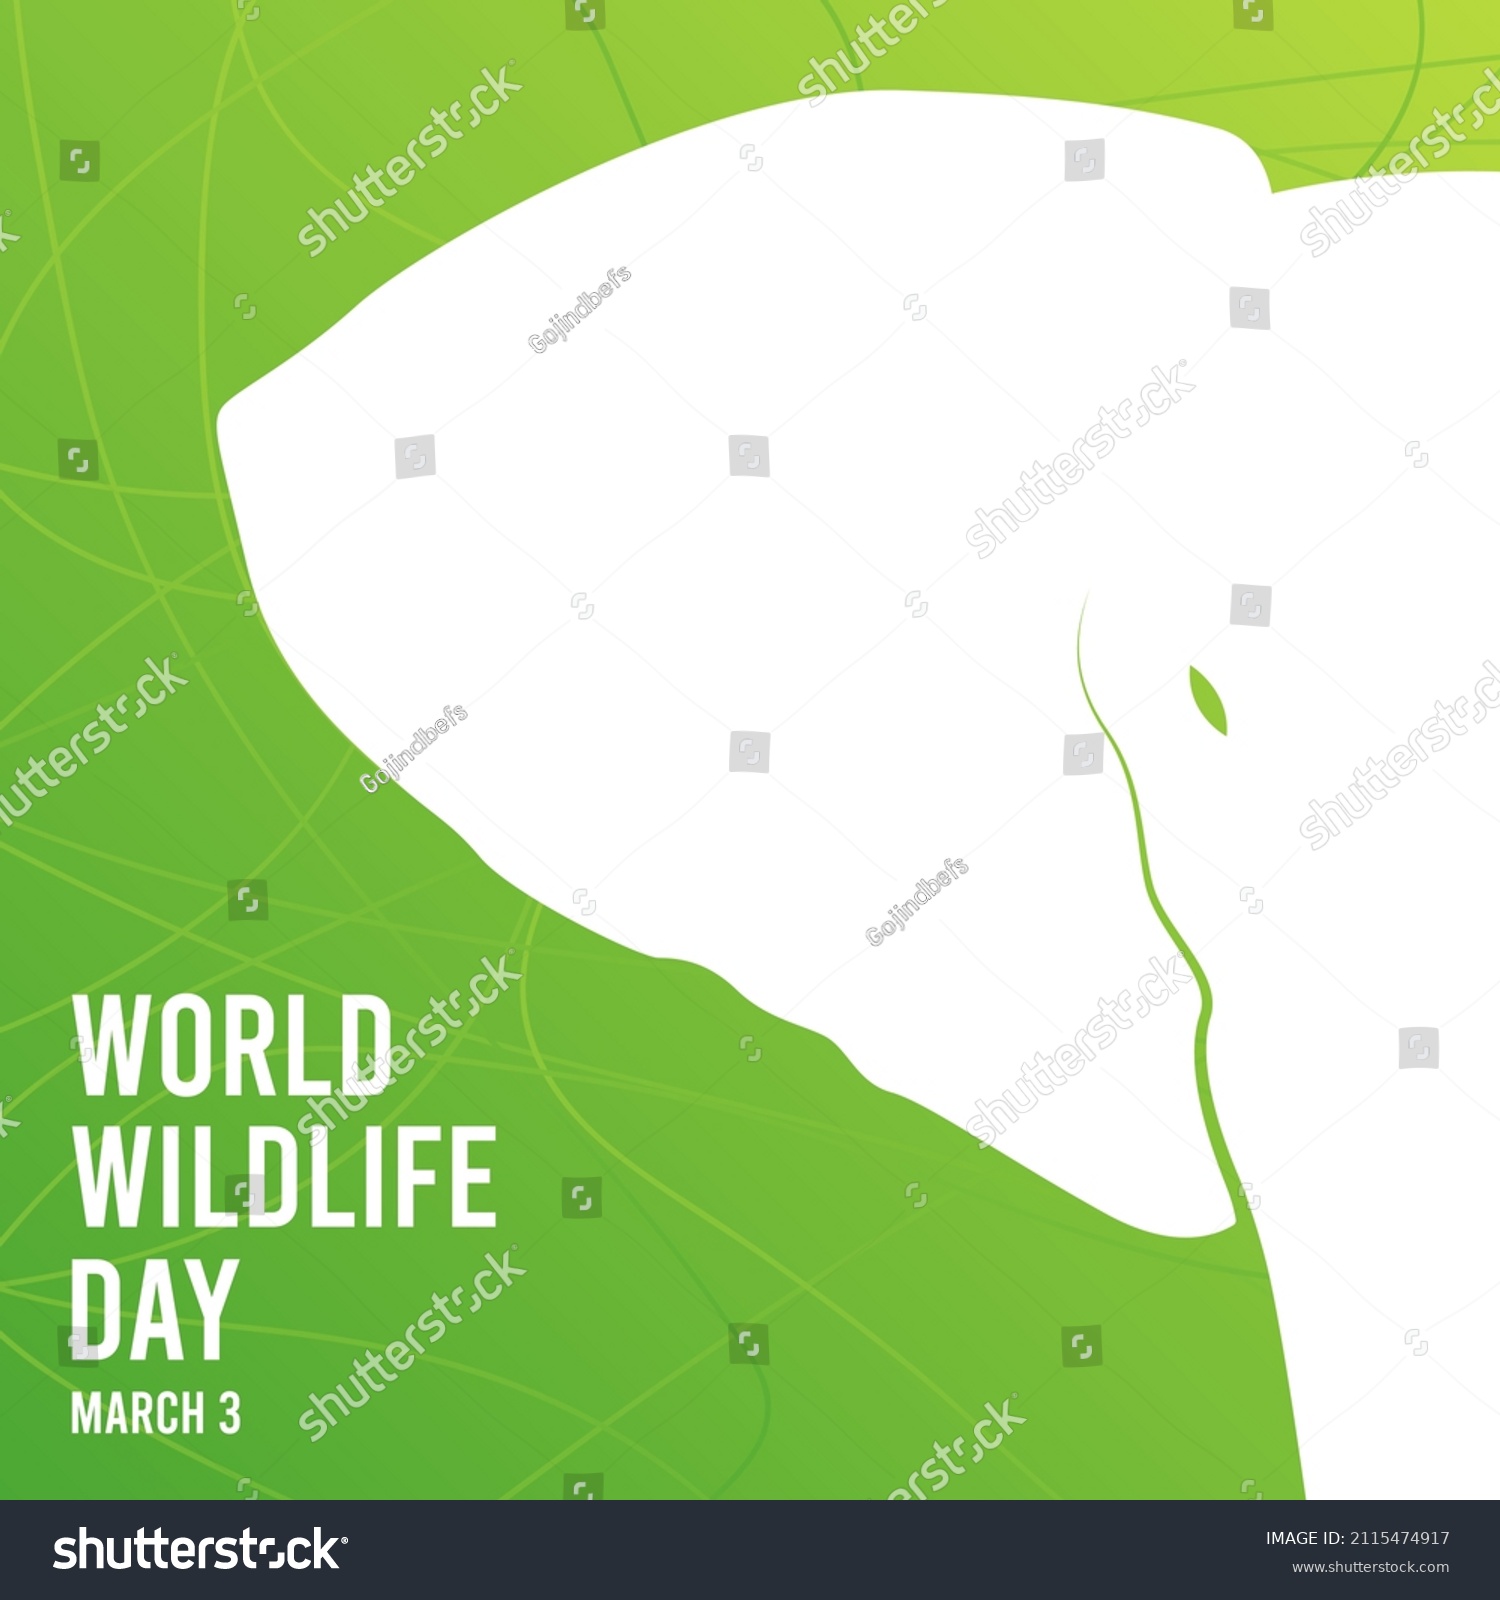 SVG of World wildlife day. March 3. Elephant head icon on green background. Poster or banner. svg